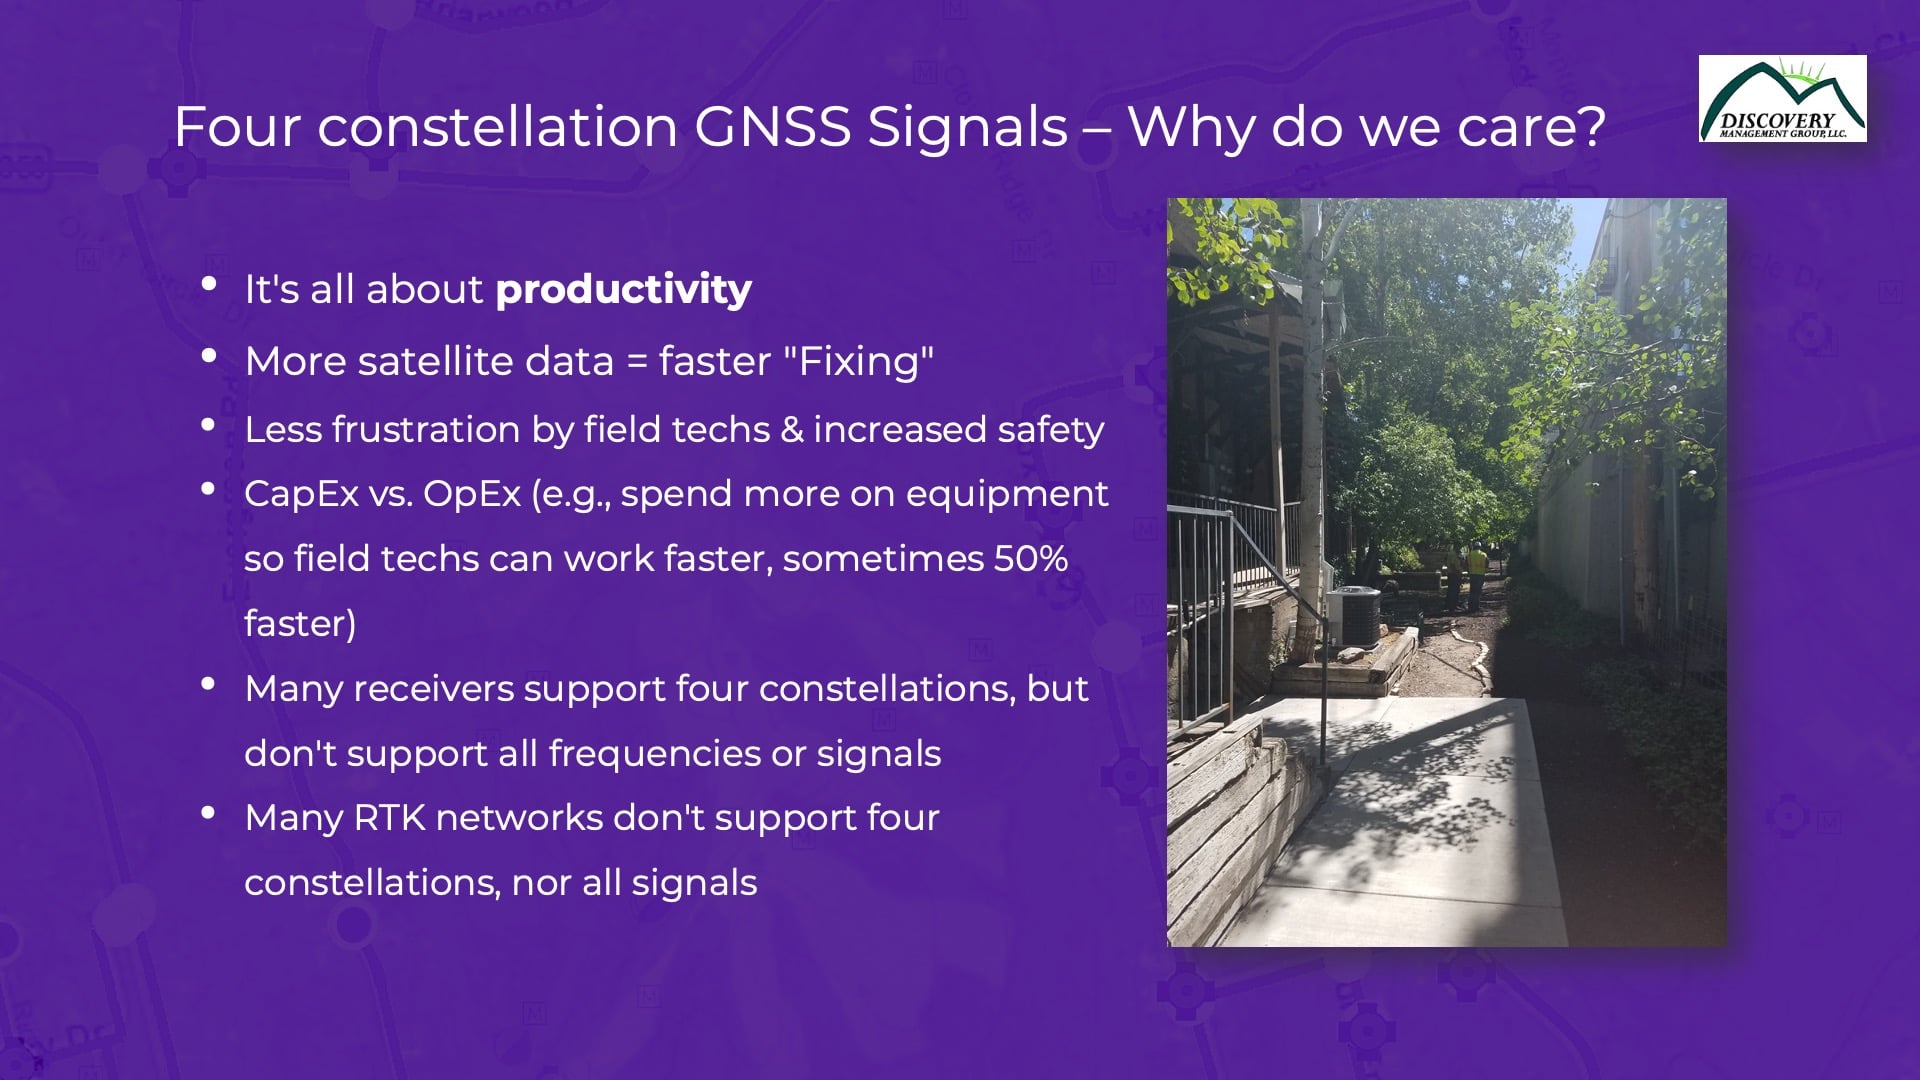 Why Four Constellation GNSS Signals